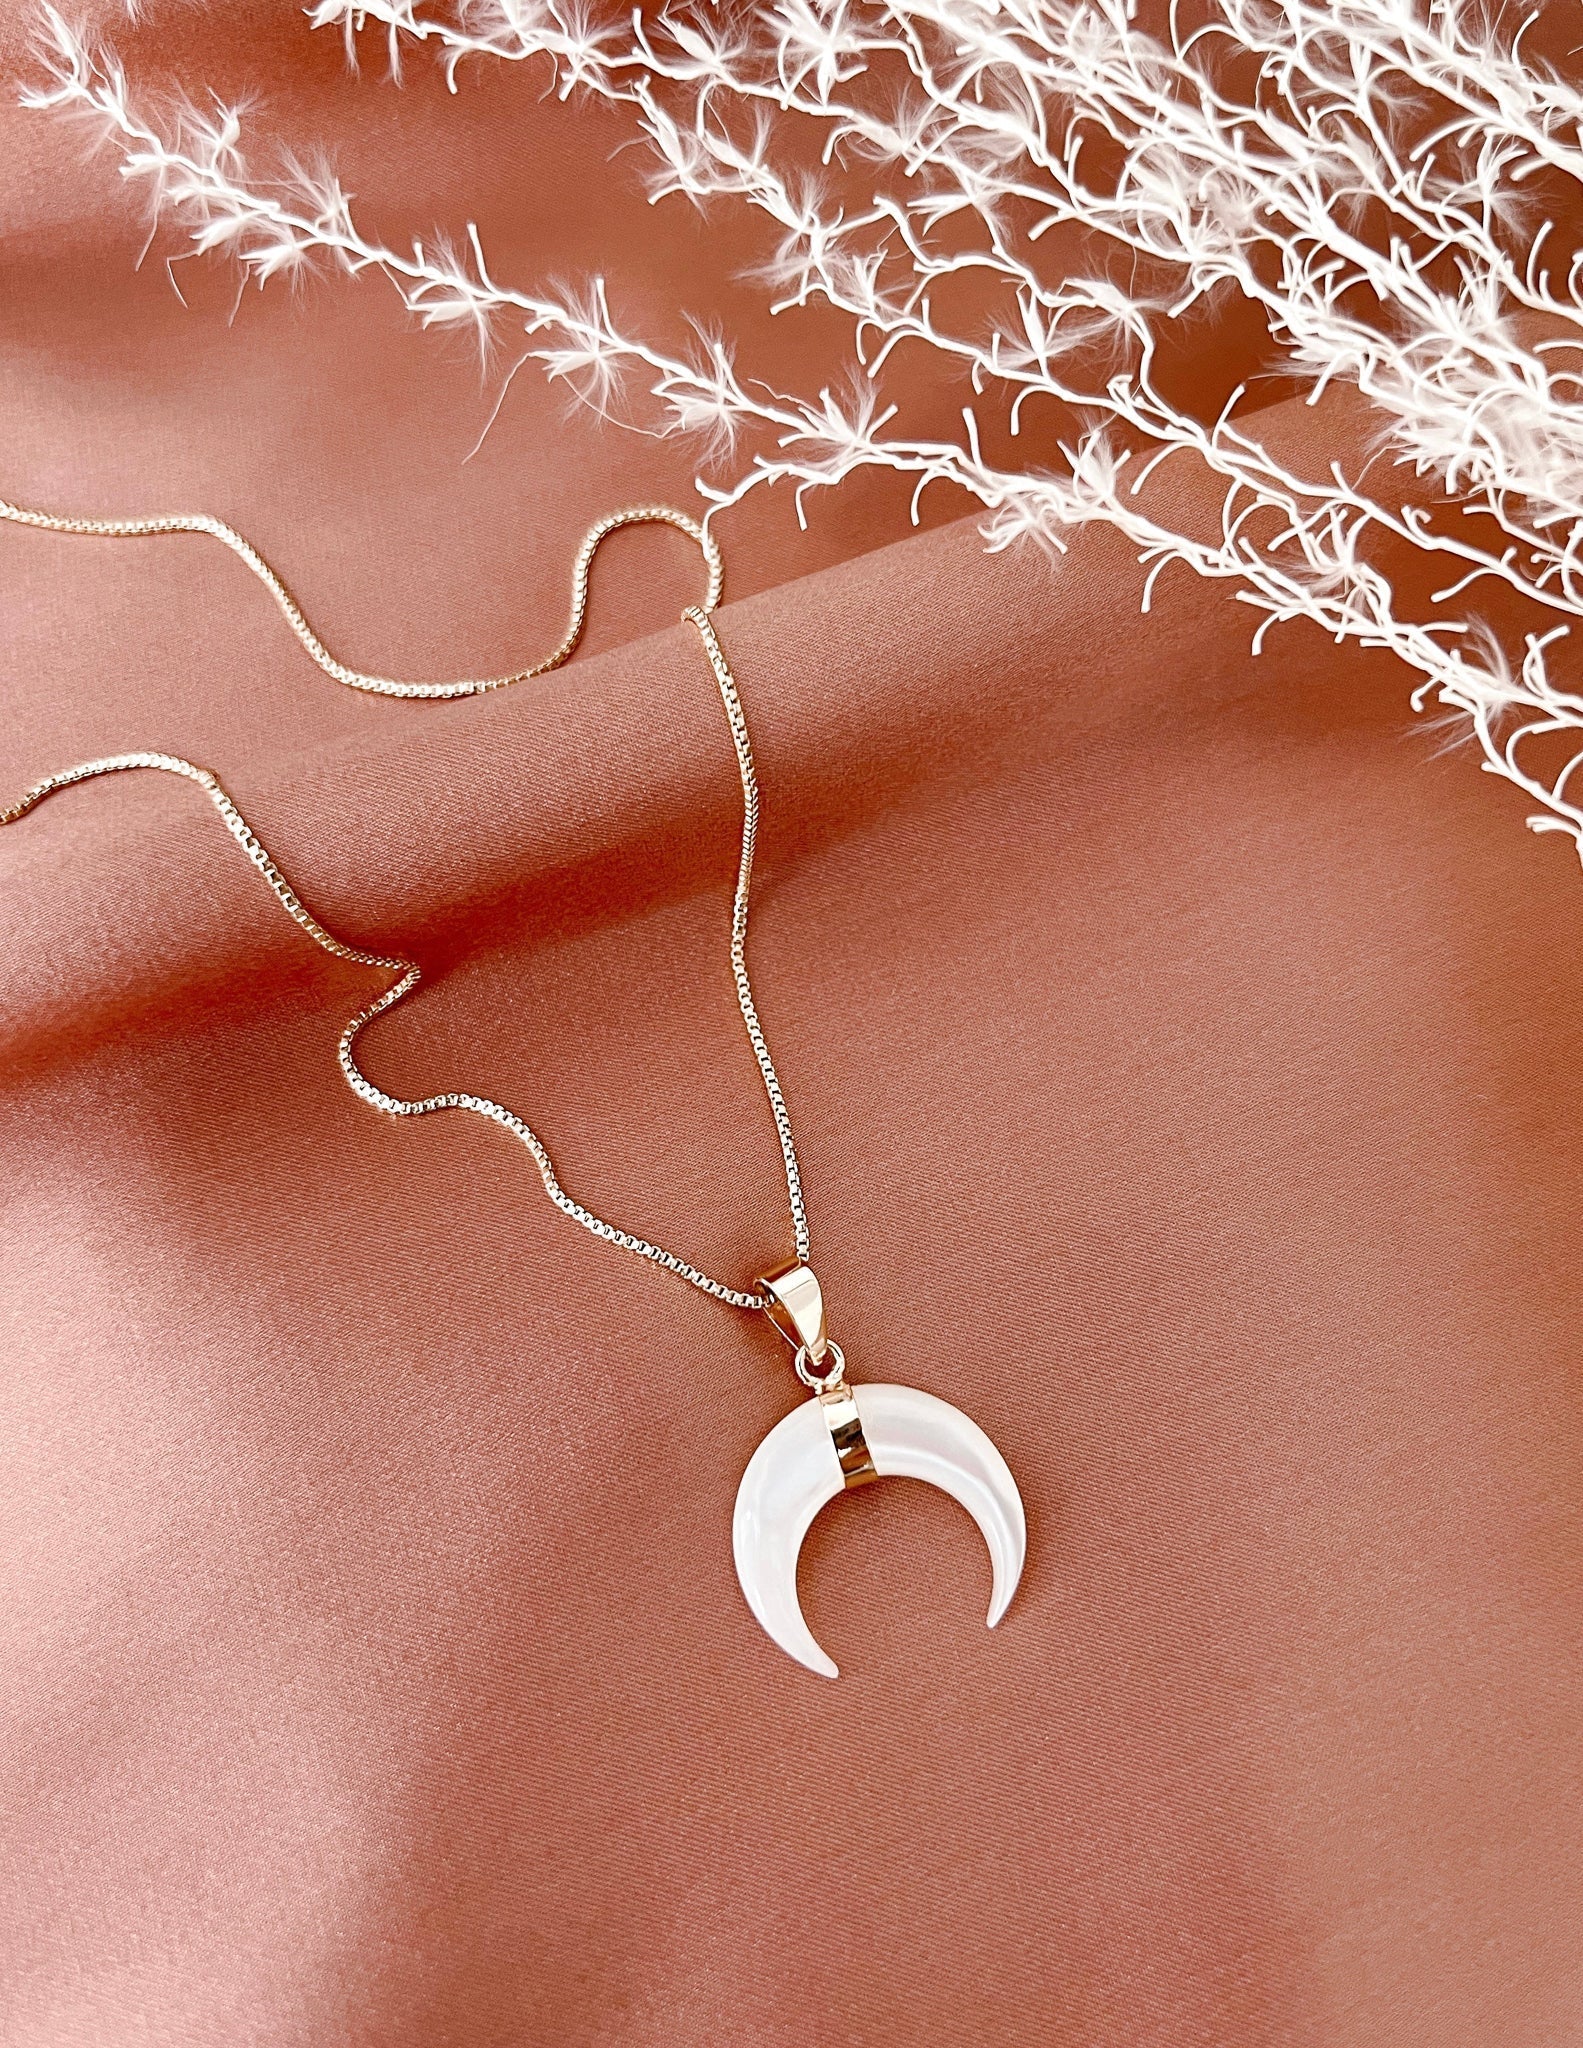 Buy Margento Jewels 925 Sterling Silver Semi Small Moon Style Charm Chain  Pendant Online